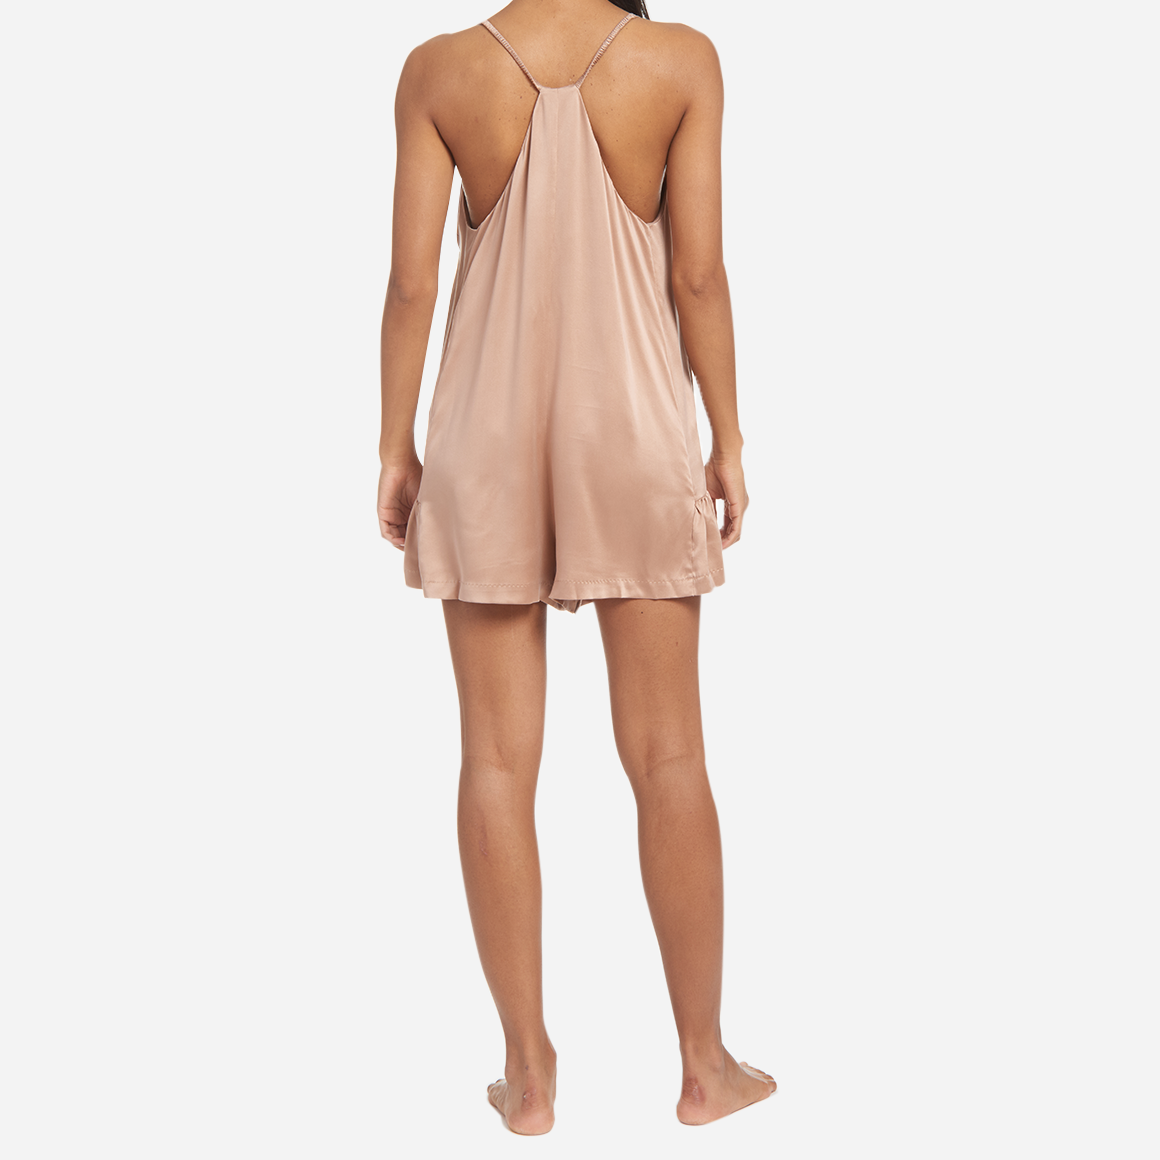 Made from the finest silk, this romper is designed to provide a comfortable and stylish sleep environment. The Washable Silk Romper features a relaxed fit that provides freedom of movement, while the V-neckline adds a flattering and sophisticated touch.